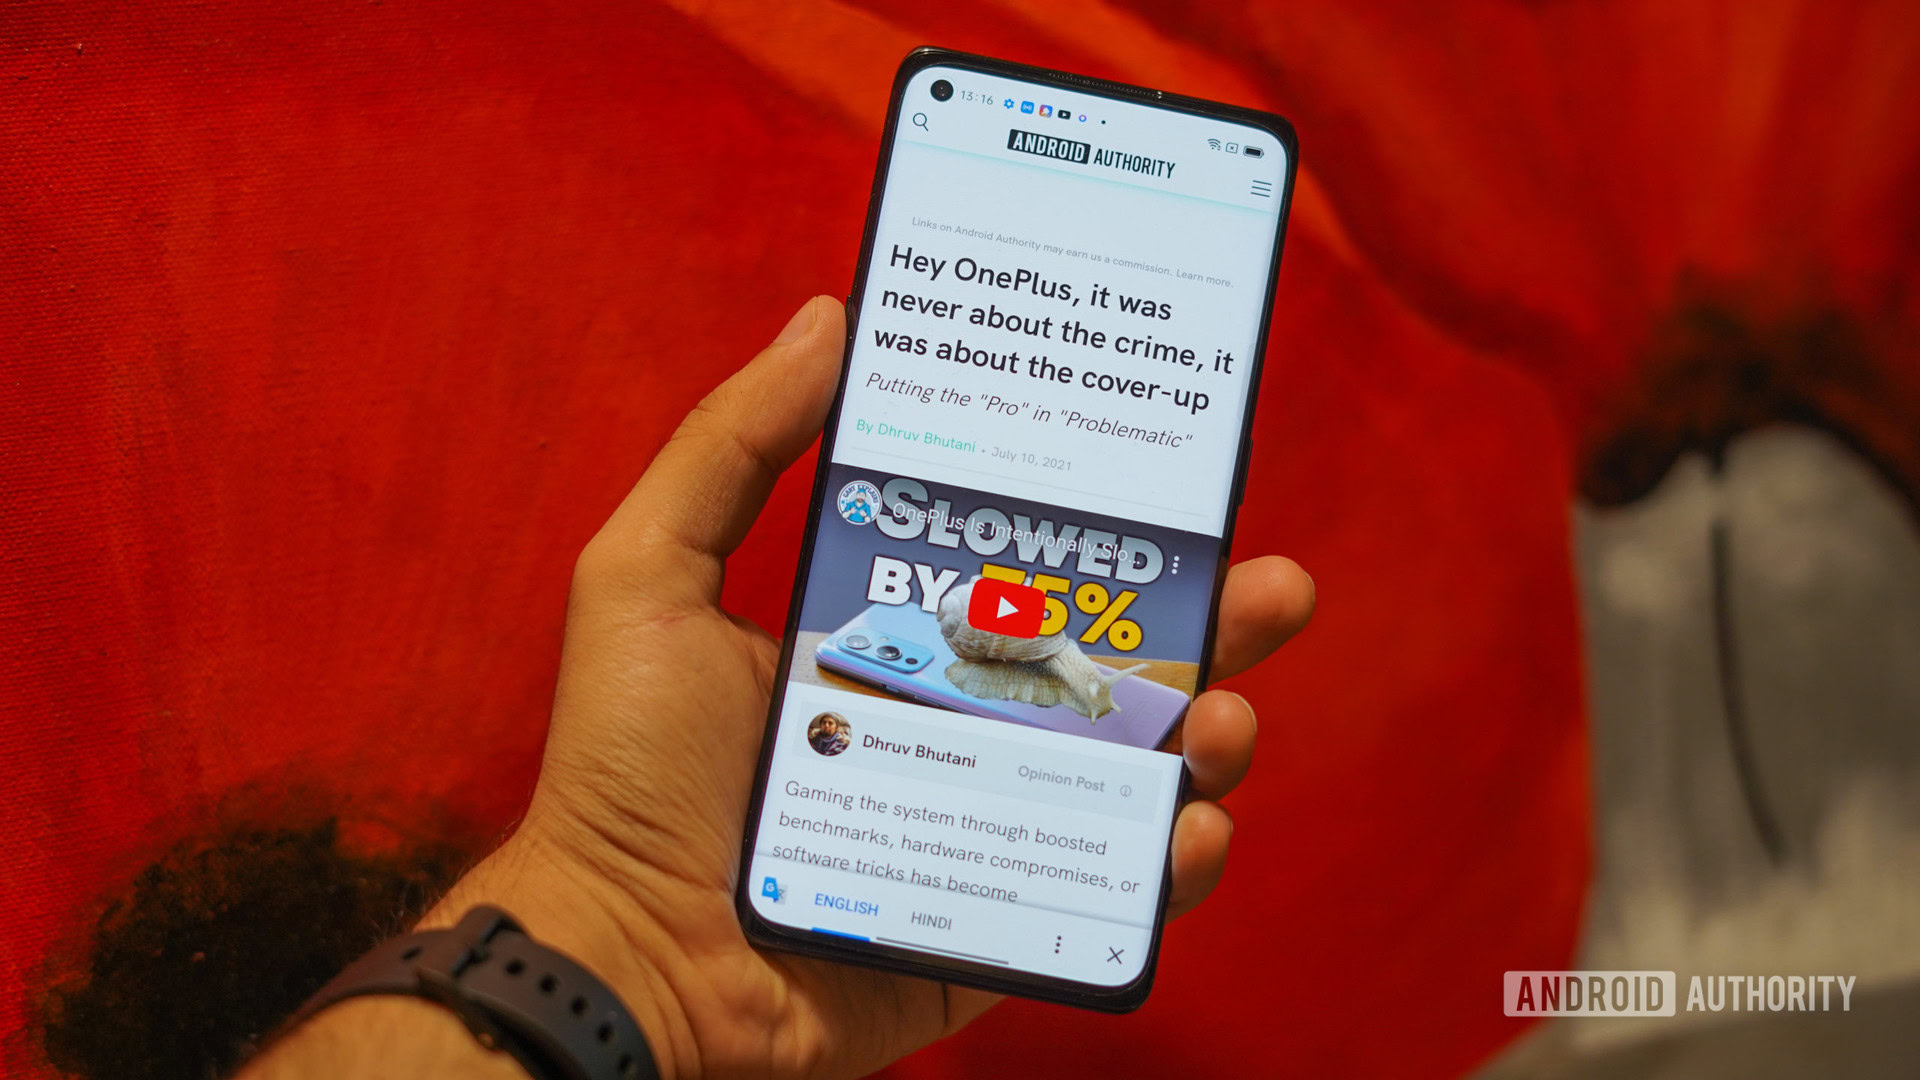 The OPPO Reno 6 Pro review in hand showing the screen with web page open.